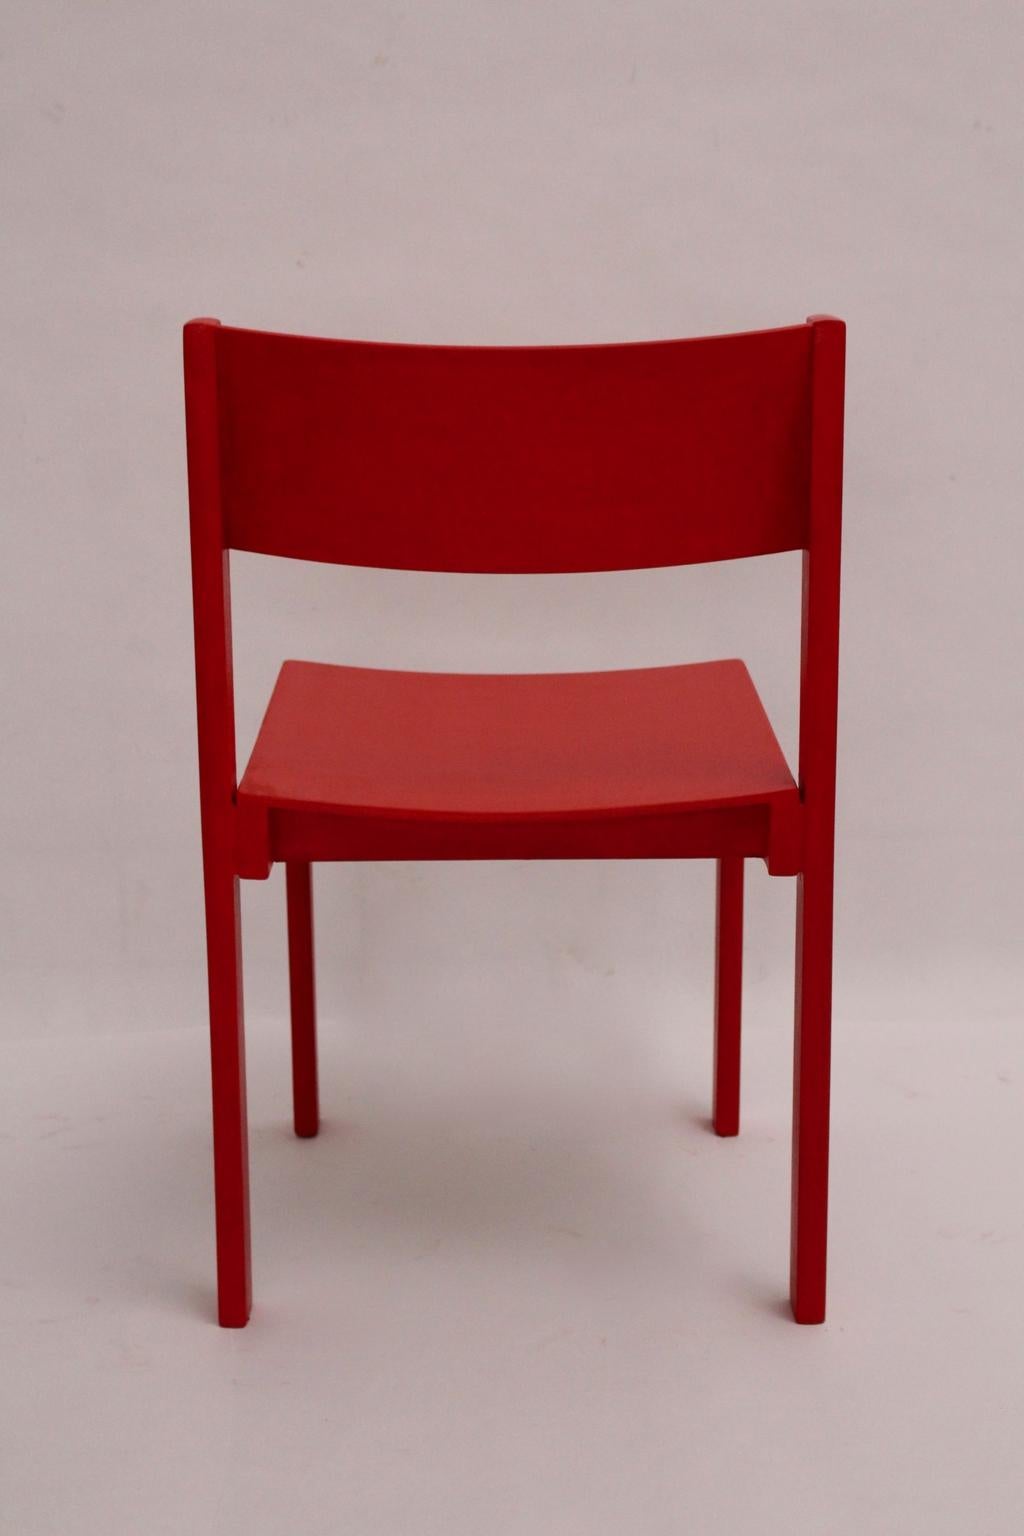 Mid-Century Modern Vintage Red Dining Room Chairs Carl Auböck, 1956, Vienna 10